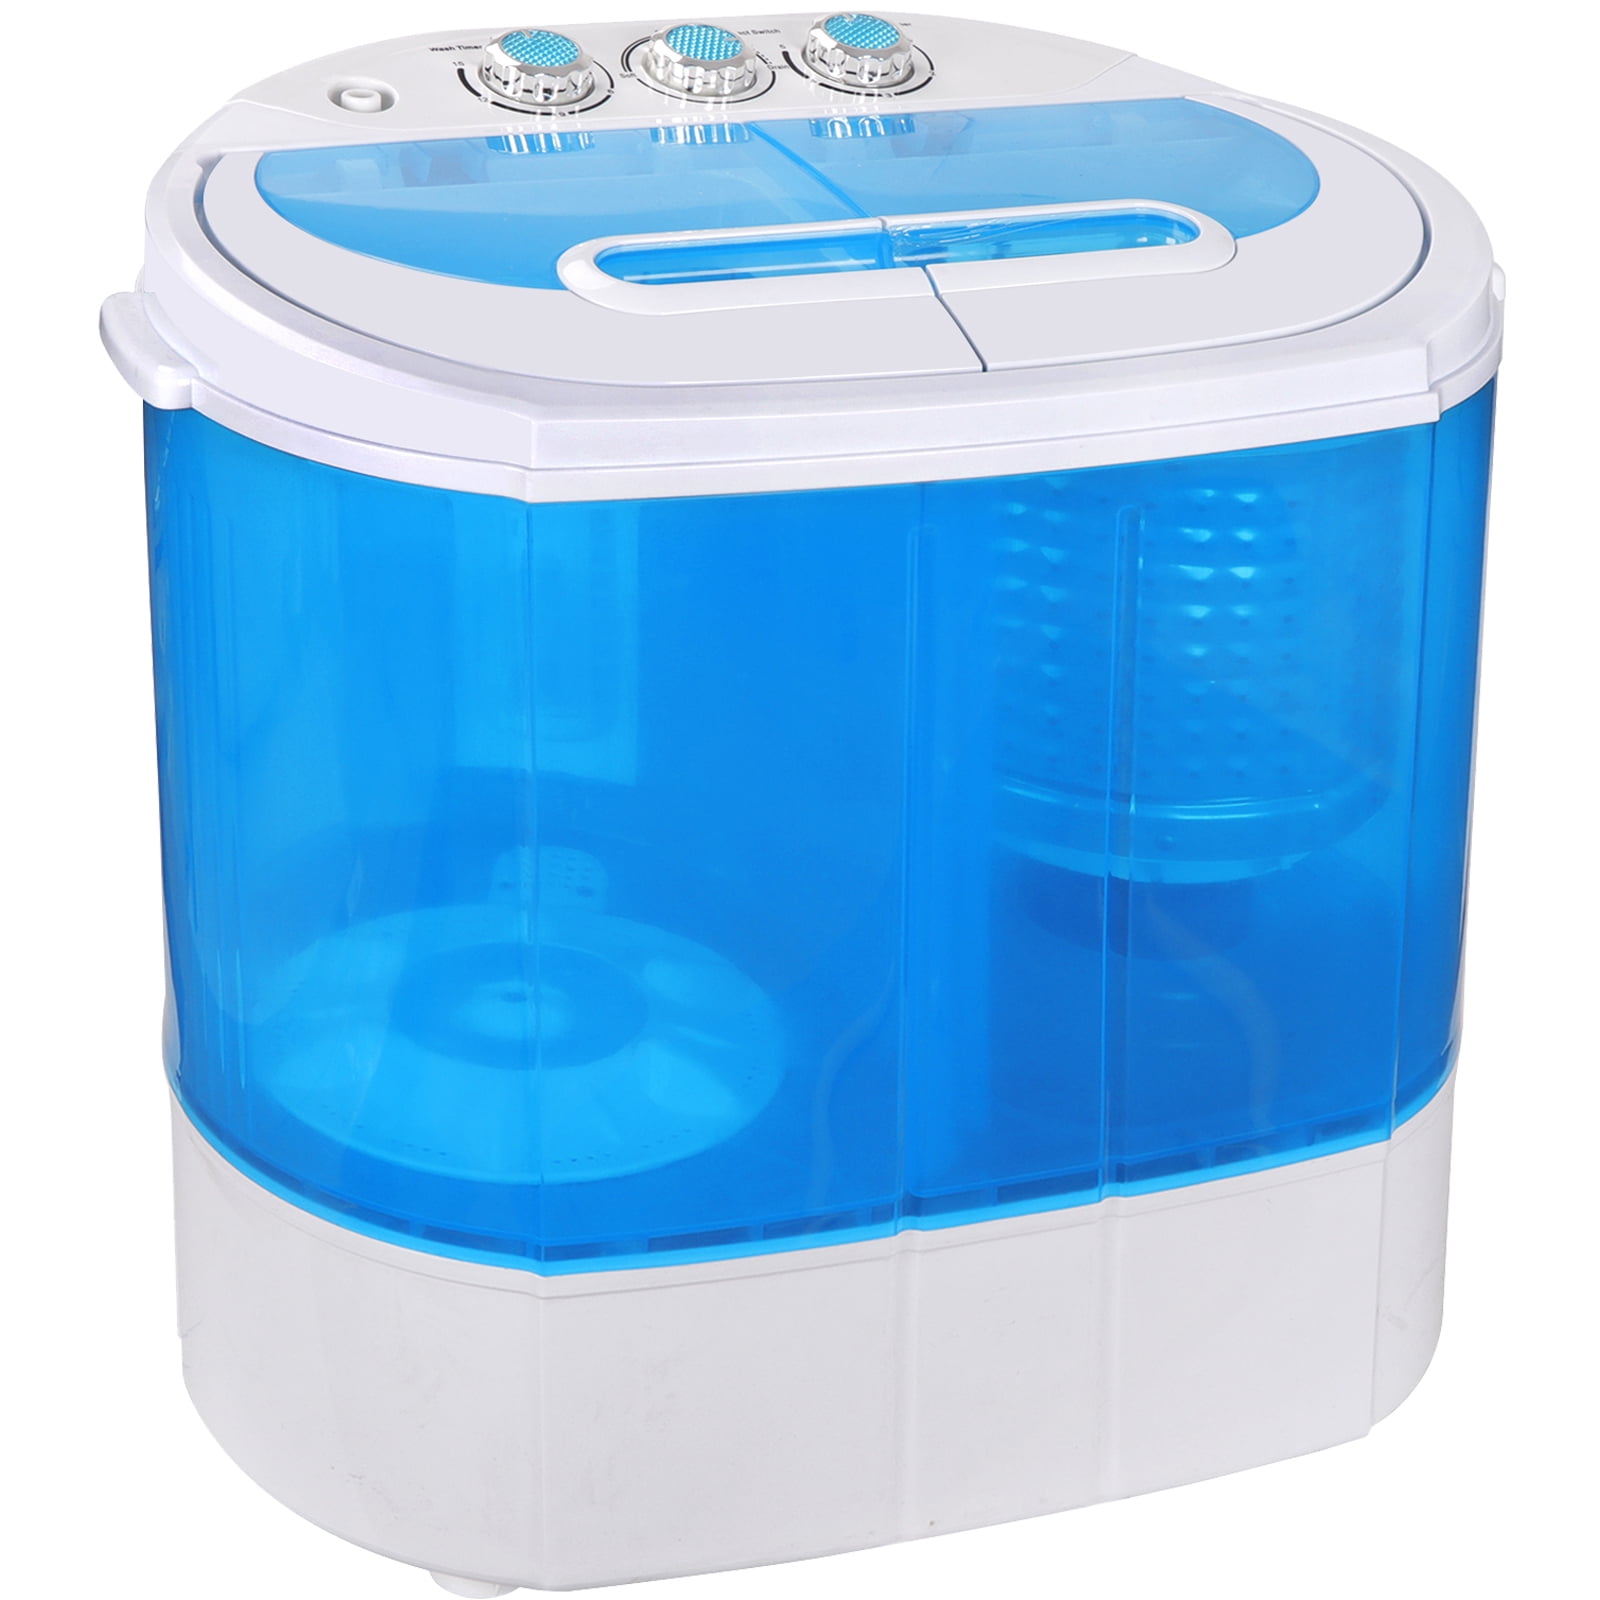 Daruoand Mini Portable Washing Machine Foldable Small Laundry Machine with  Drain Basket Lightweight Washer Touch Screen and Timer Reusable Washing